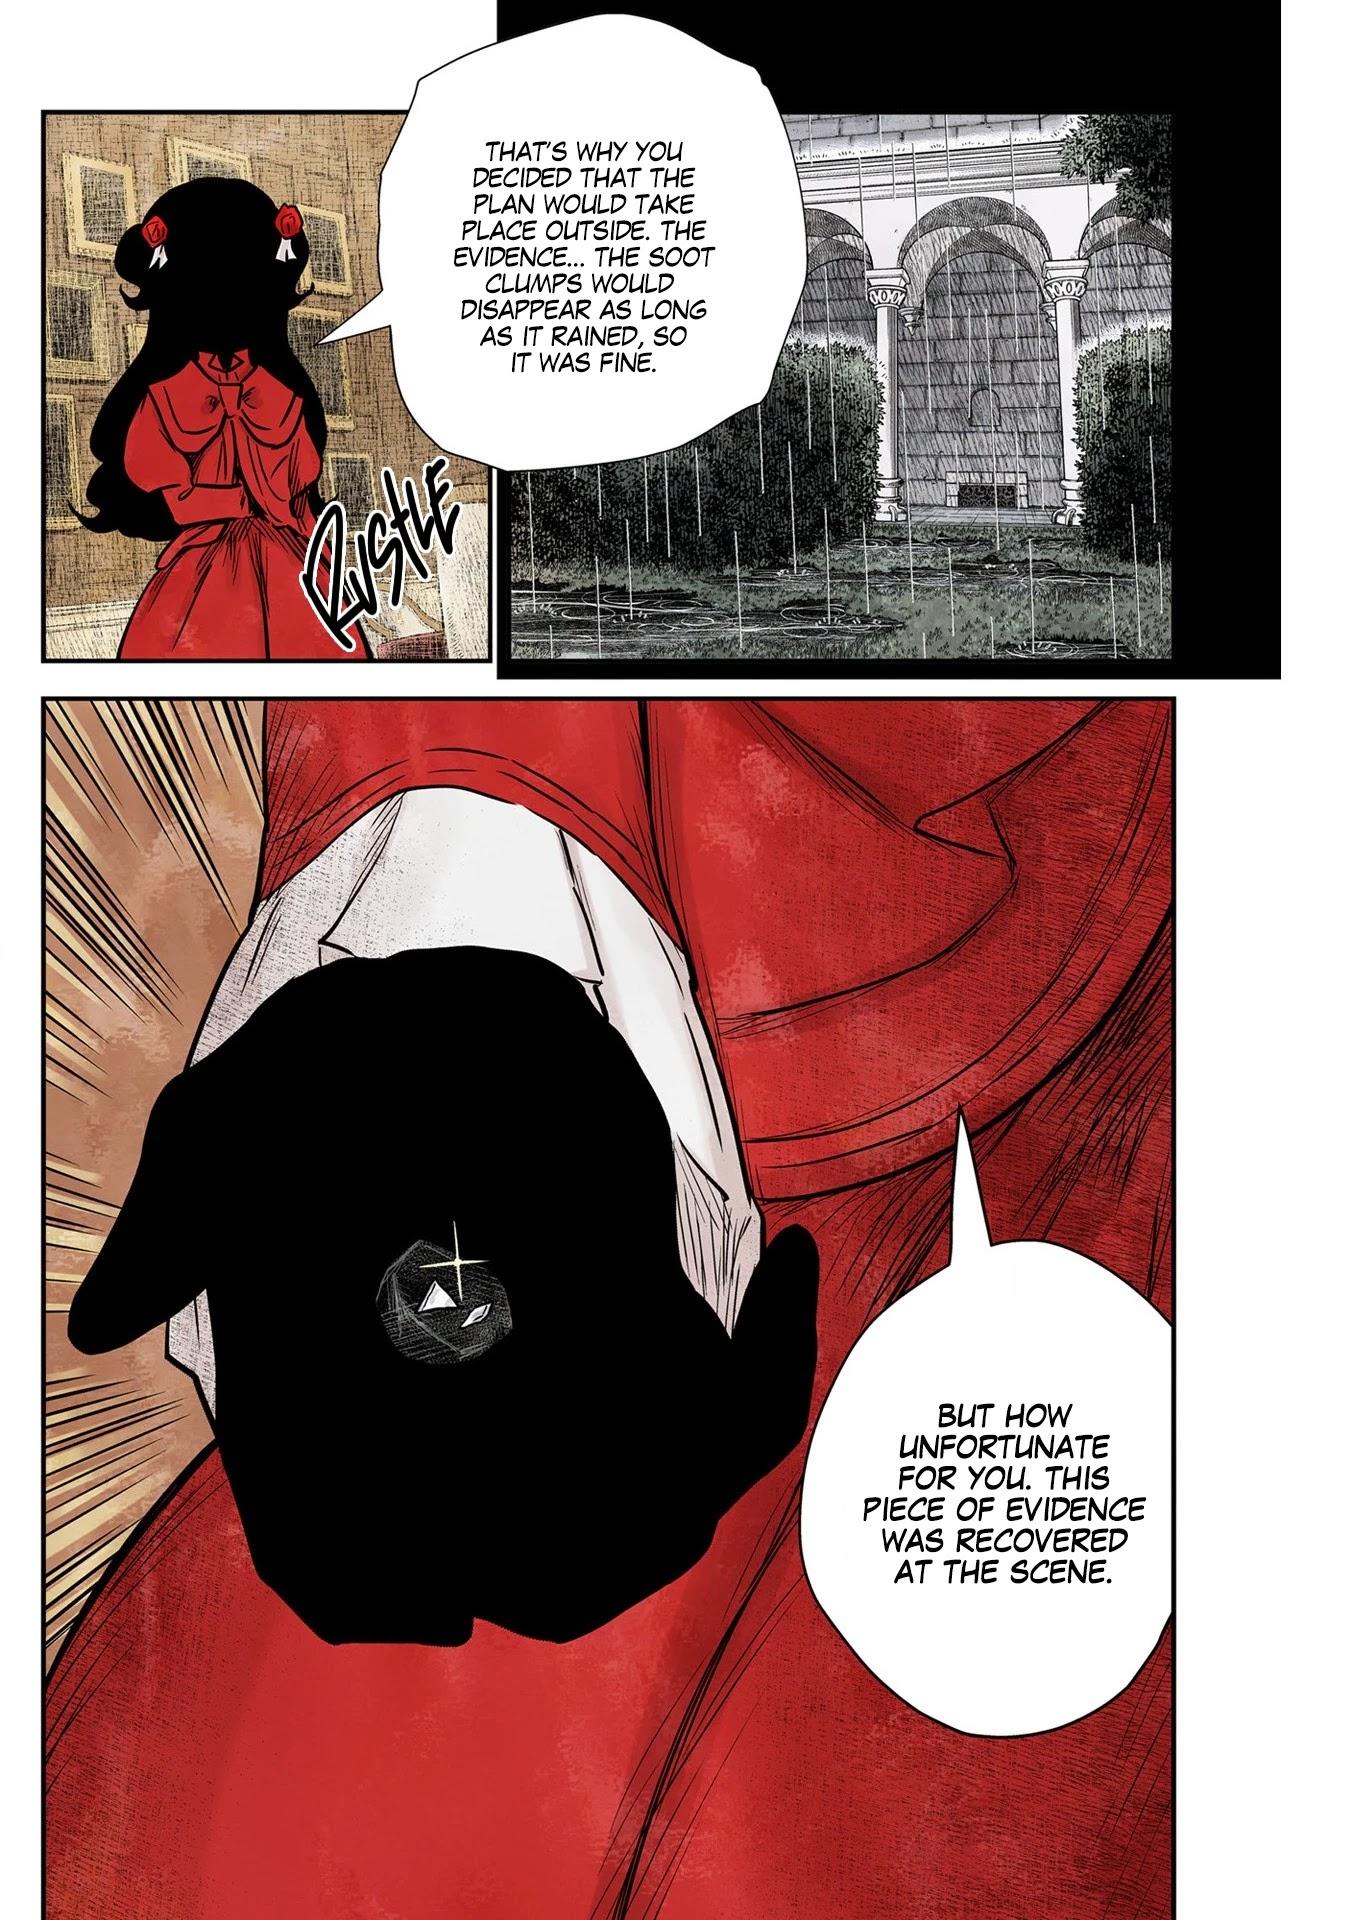 Shadow House Chapter 140: A Hole In The Plan page 11 - 